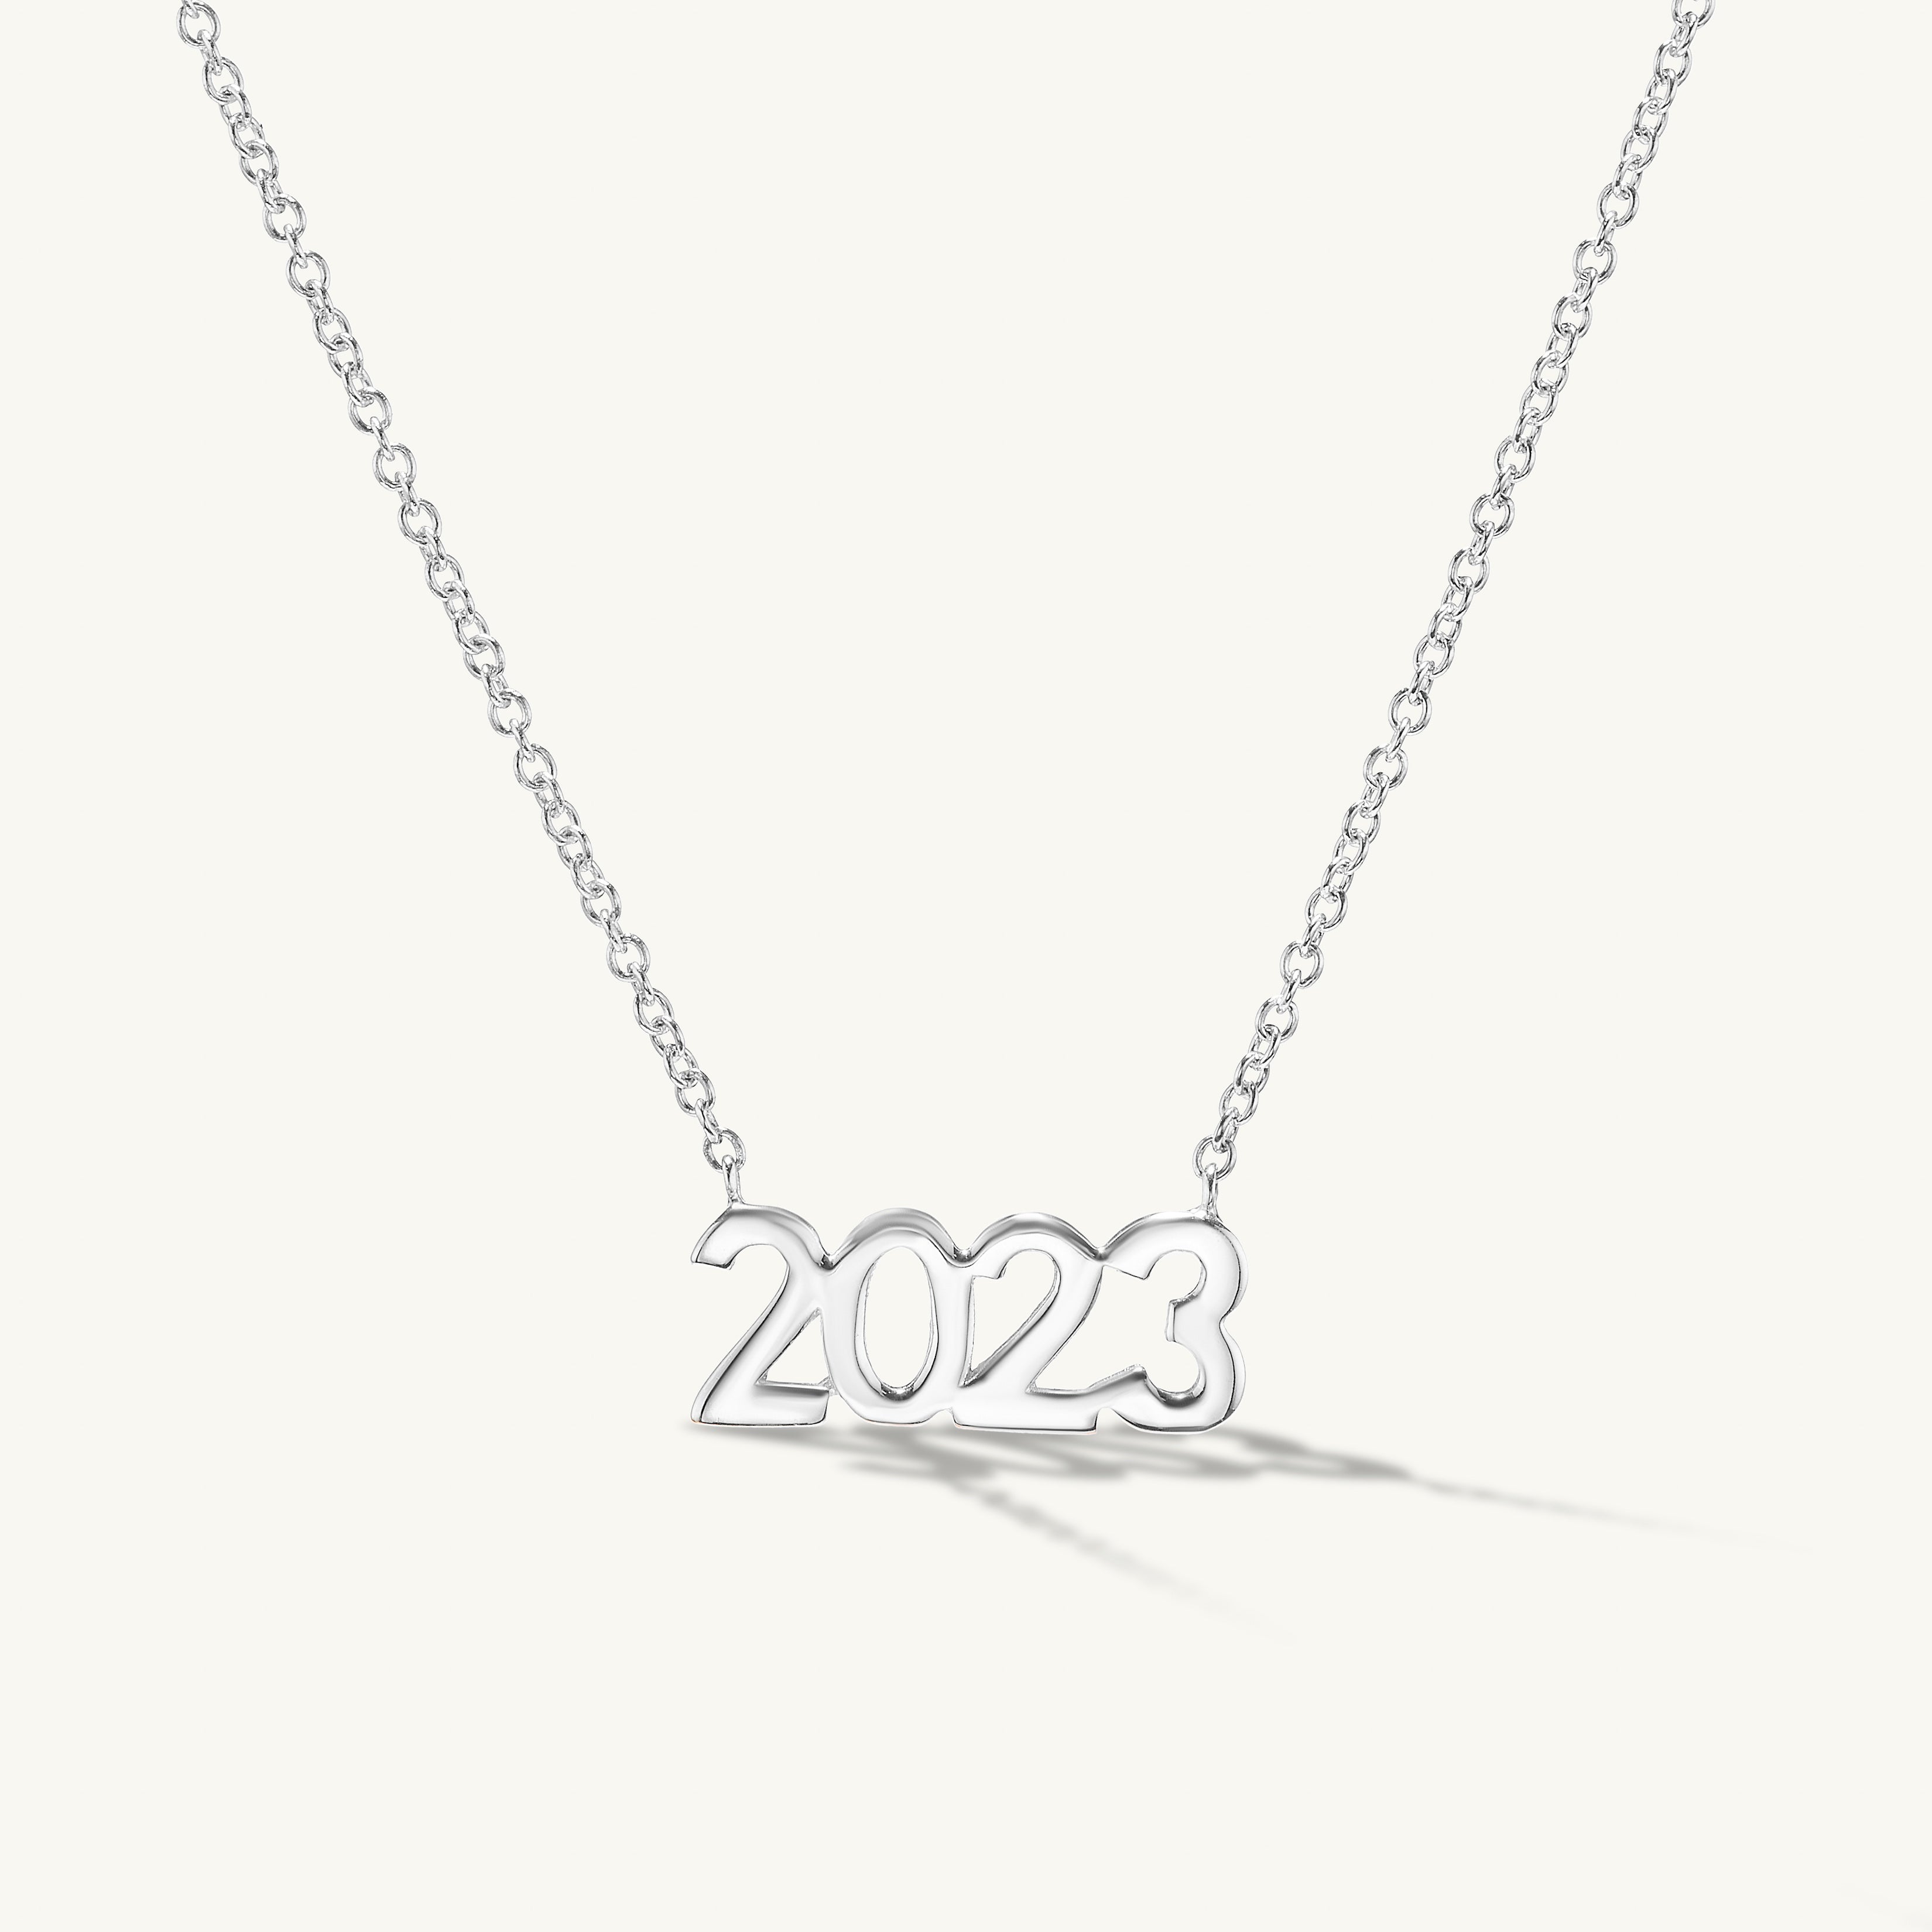 Gold Custom Date Necklace